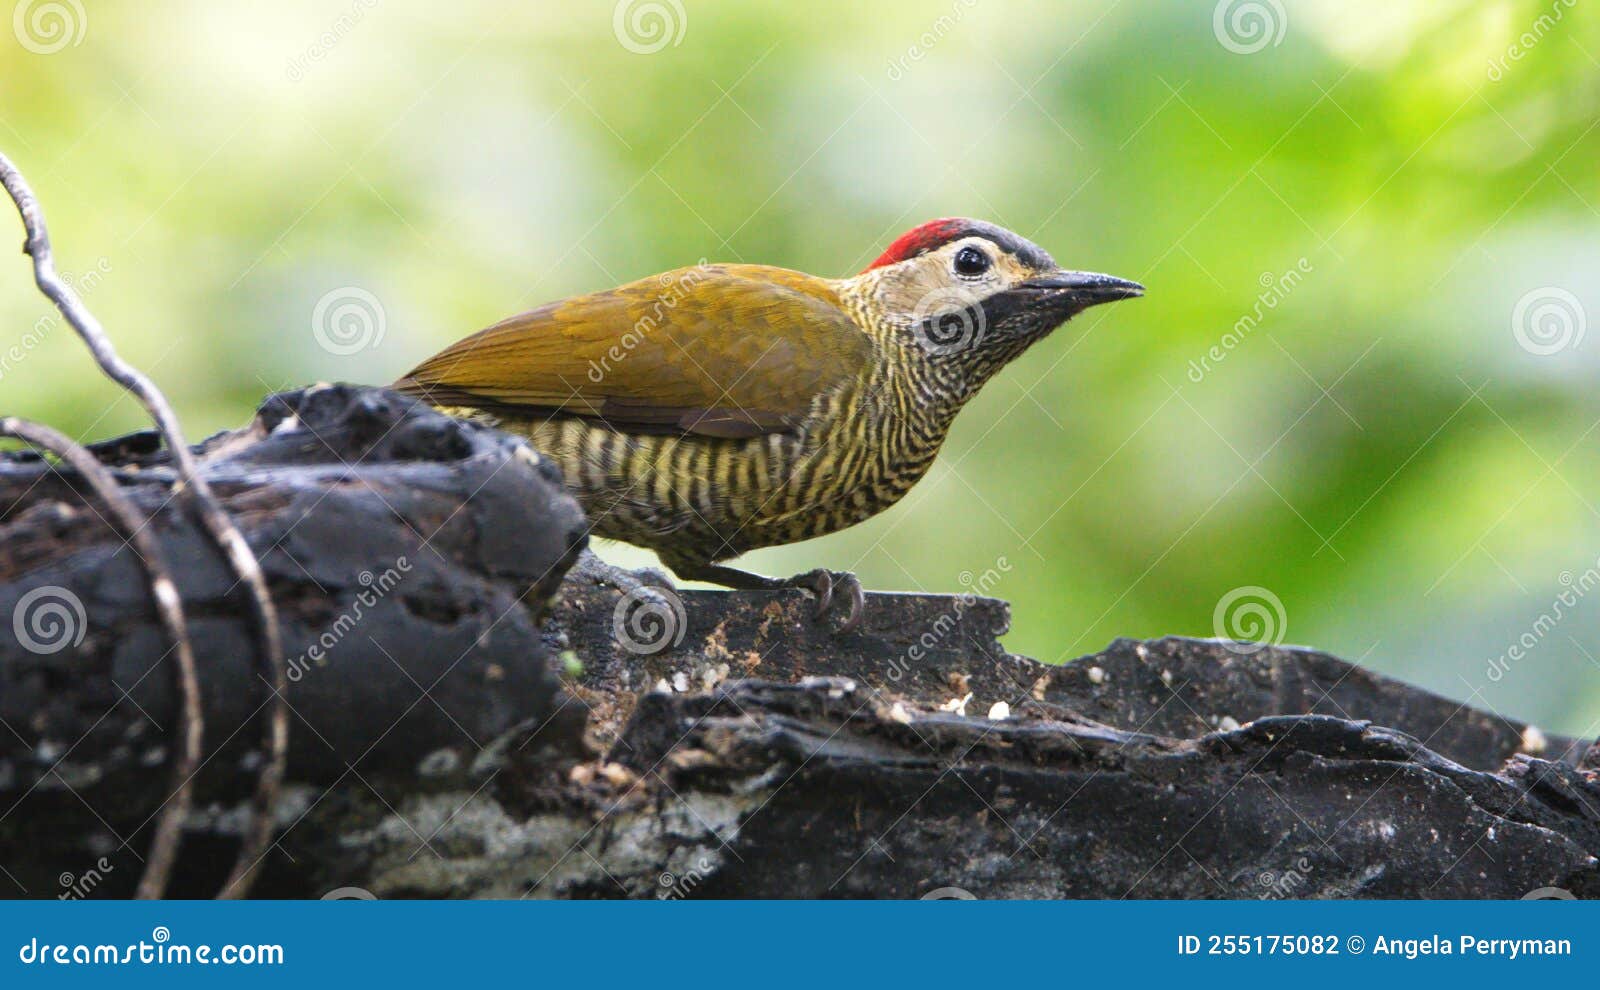 golden-olive woodpecker on a branch